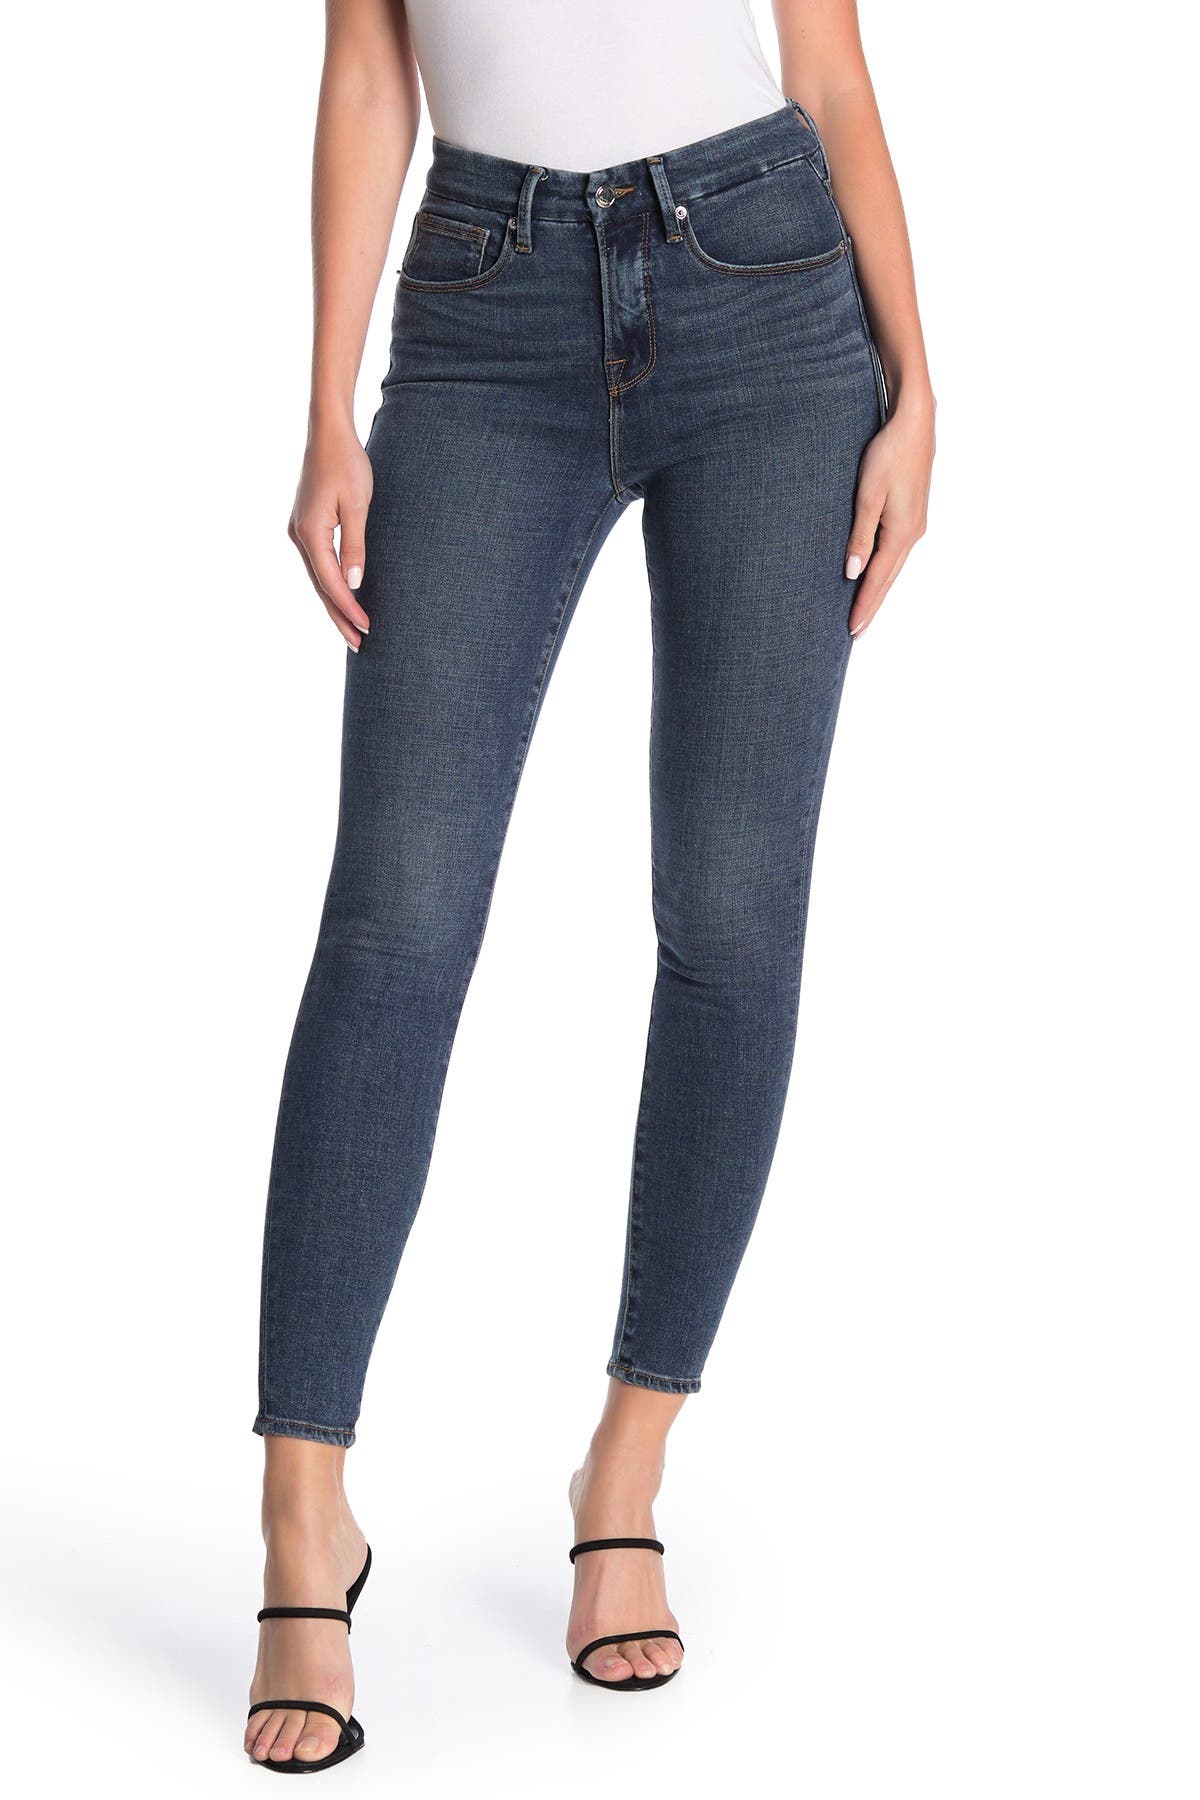 great american jeans nordstrom